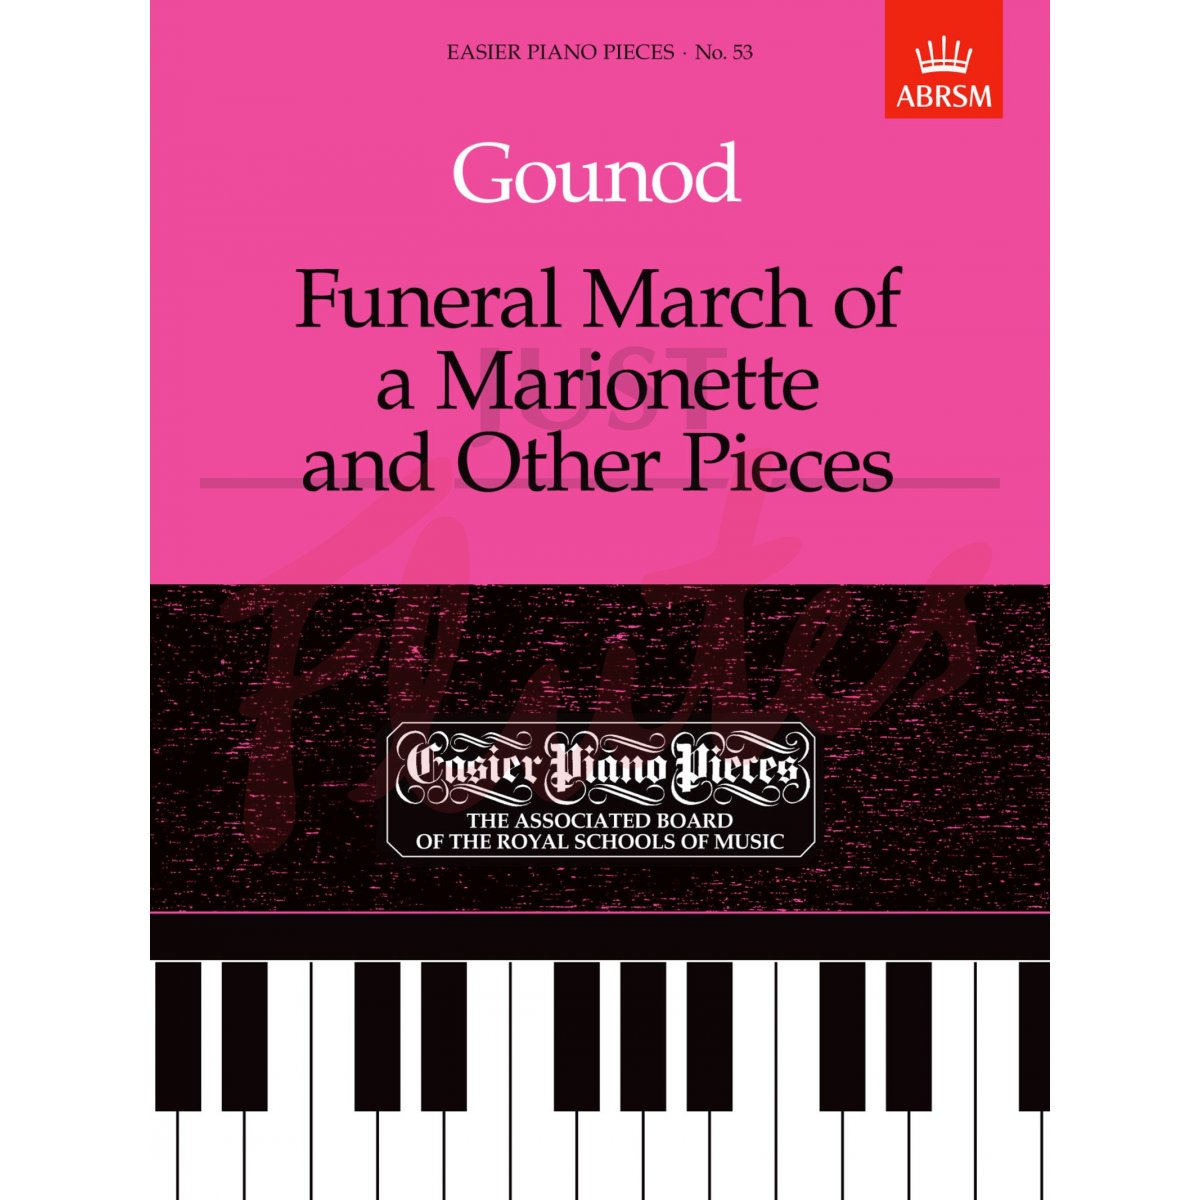 Funeral March of a Marionette and Other Pieces